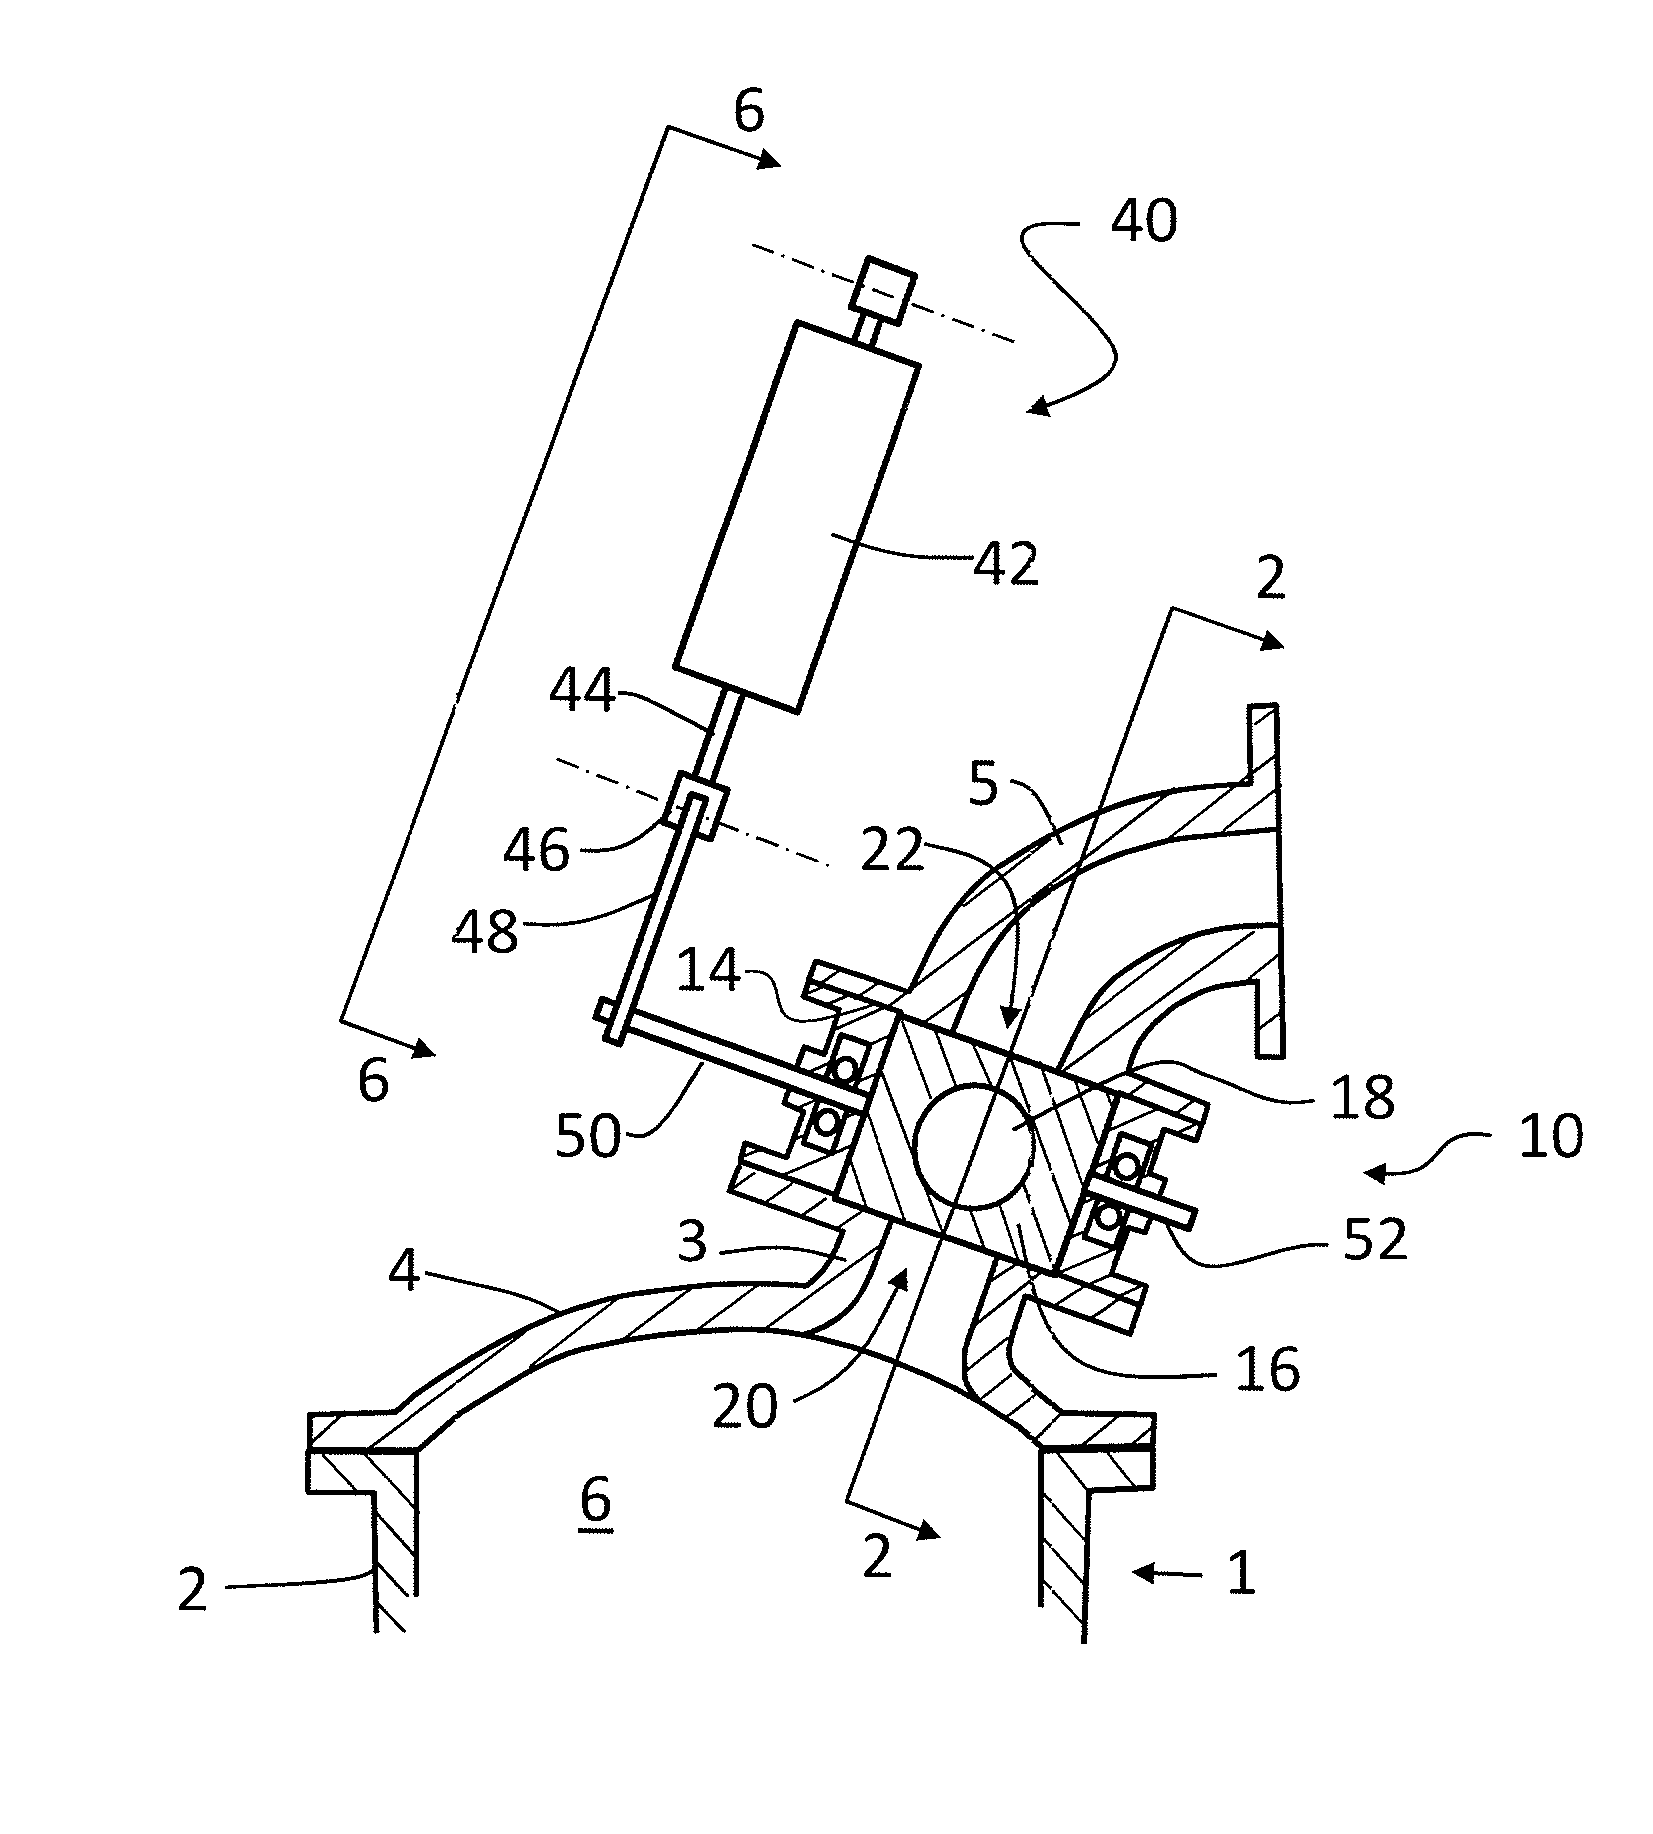 Solenoid-controlled rotary intake and exhaust valves for internal combustion engines